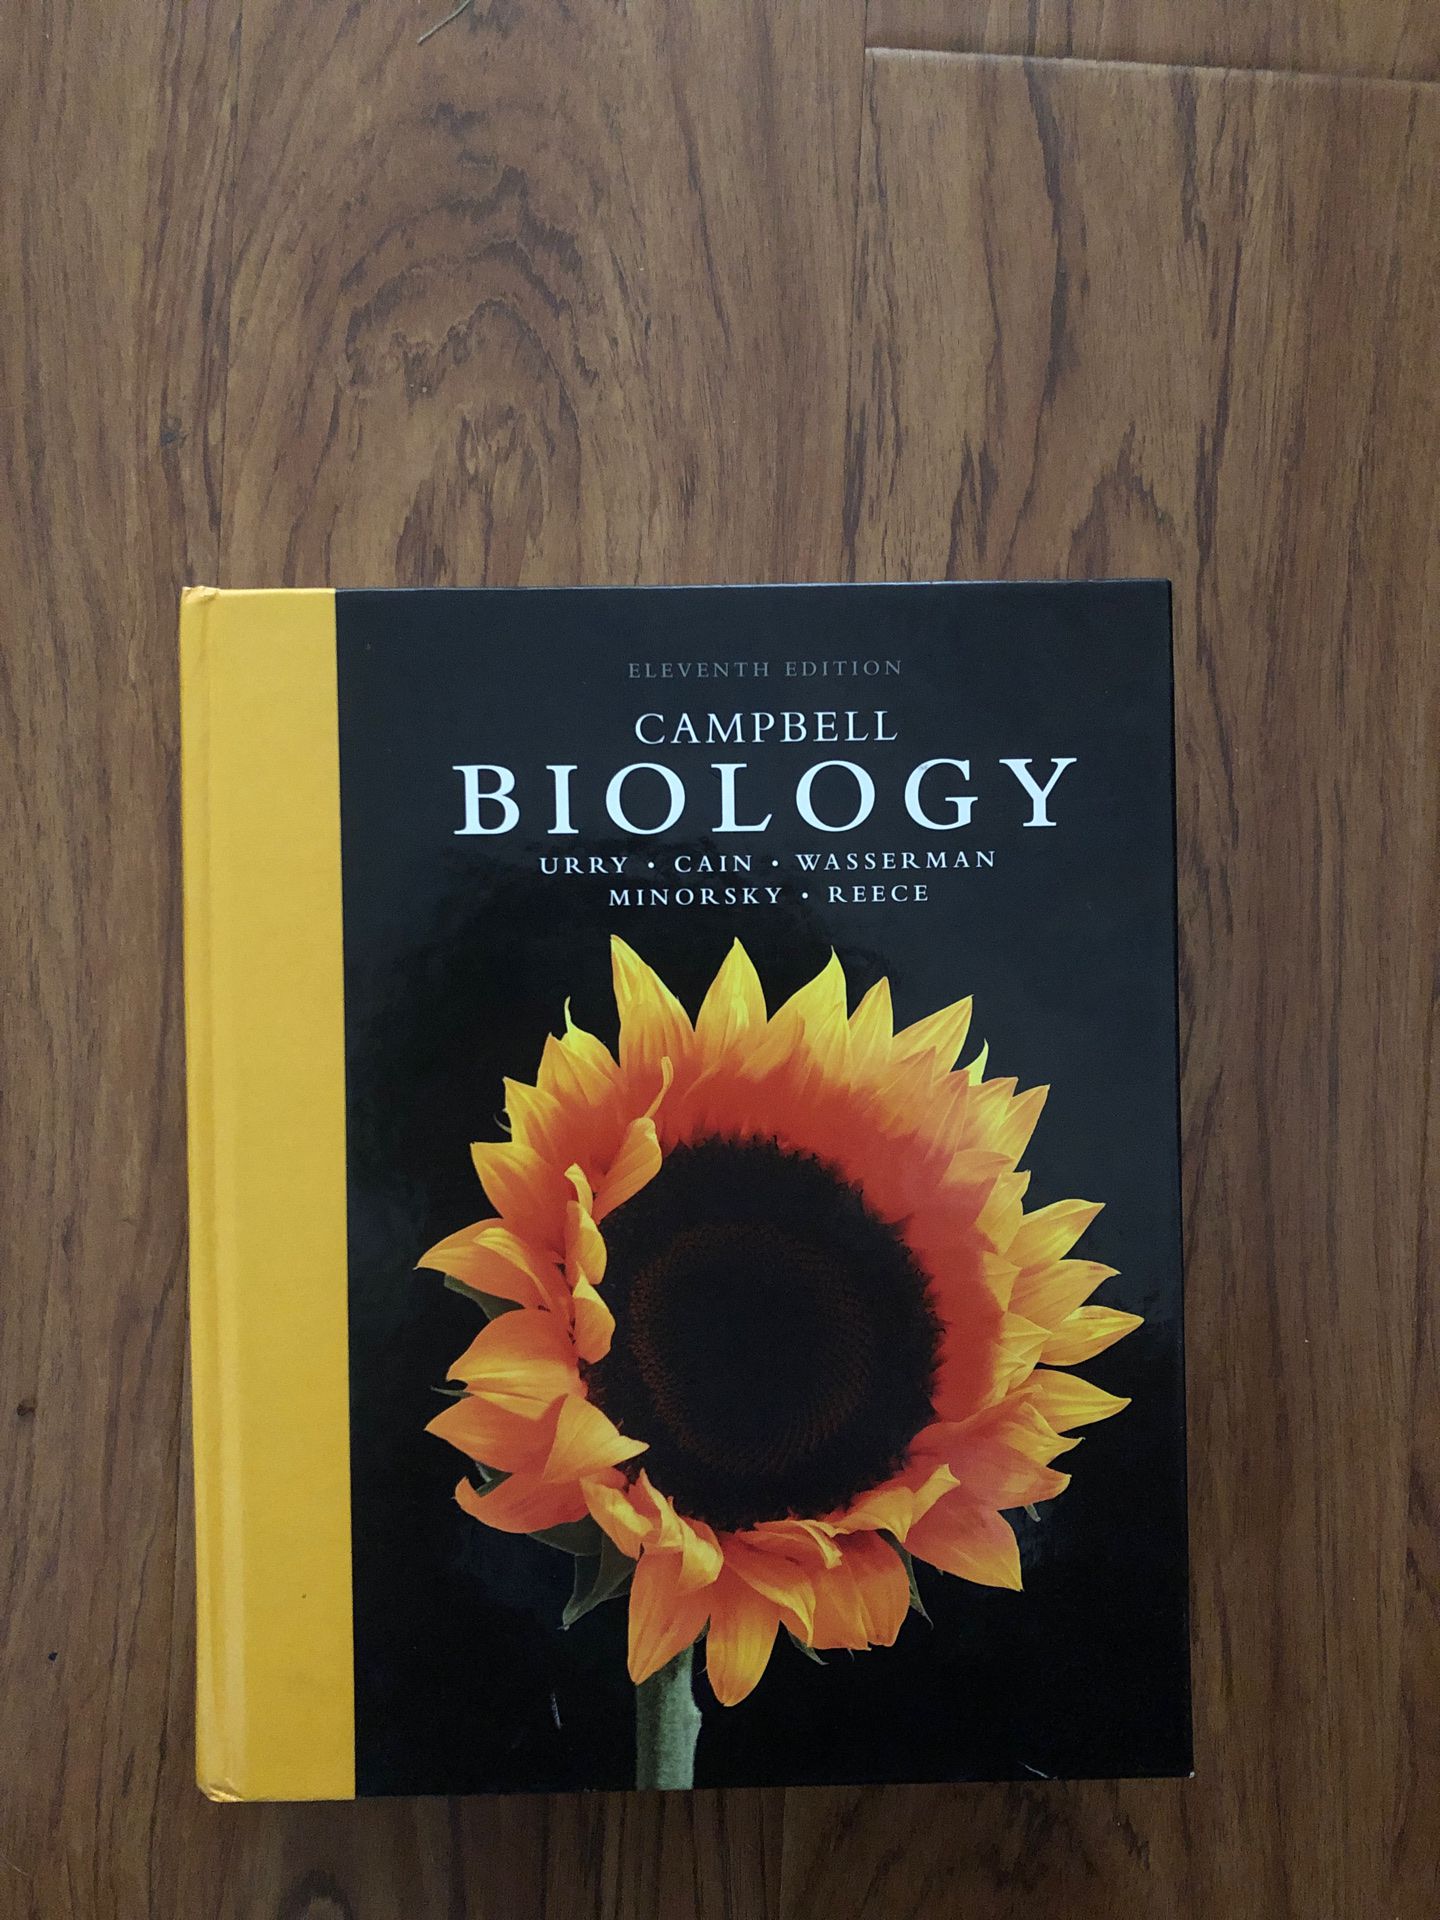 Campbell eleventh edition biology, By Urry, Cain, Wasserman, Minorsky, Reece, Pearson textbook